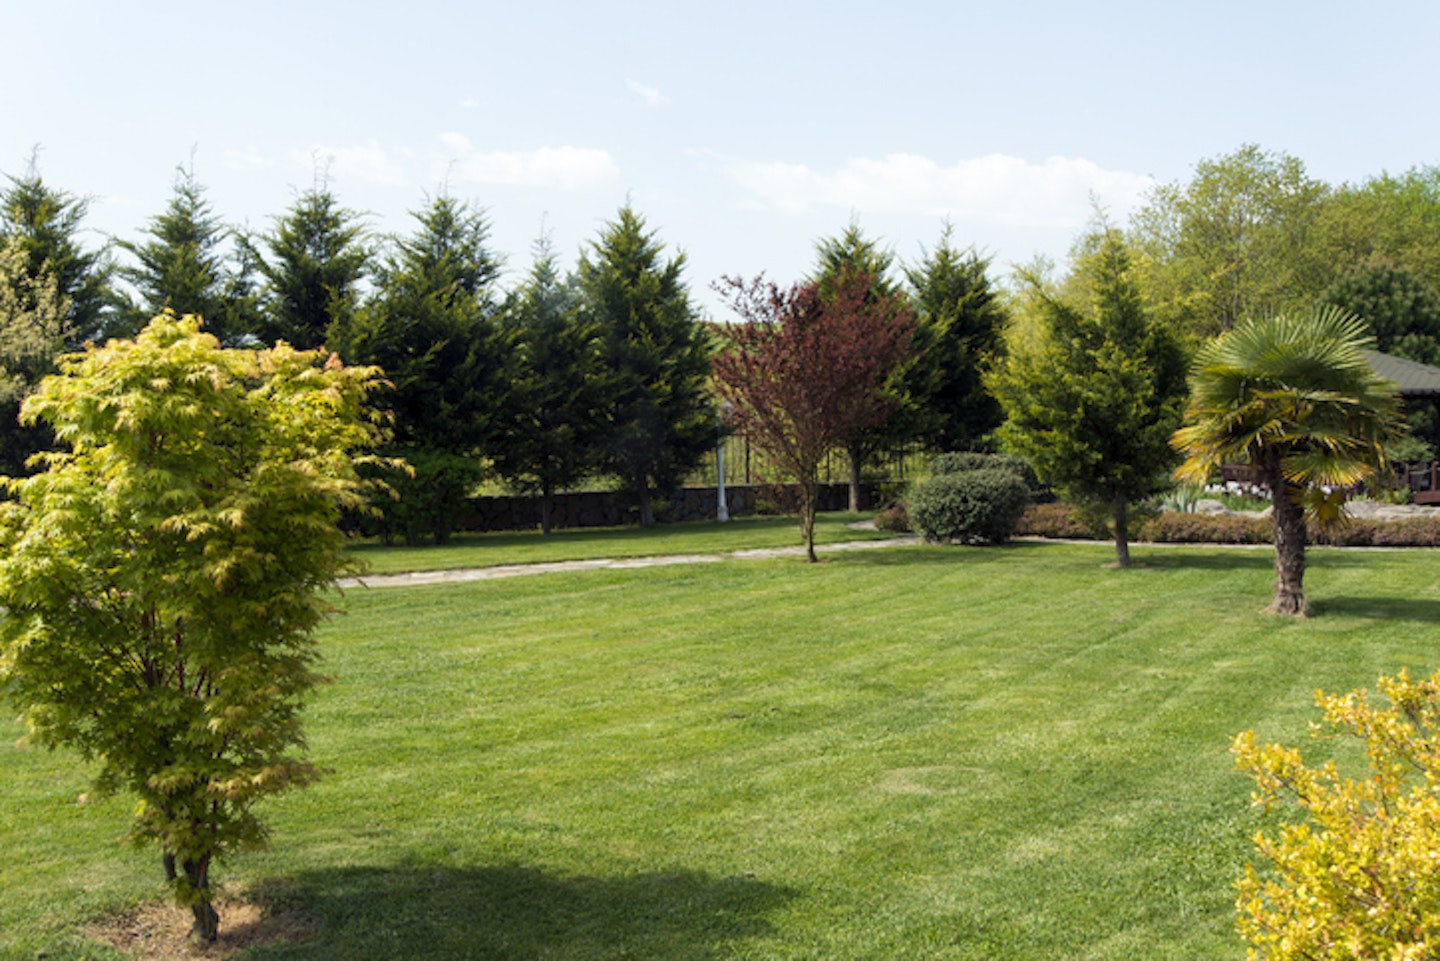 A picture of a beautiful green lawn with trees surrounding